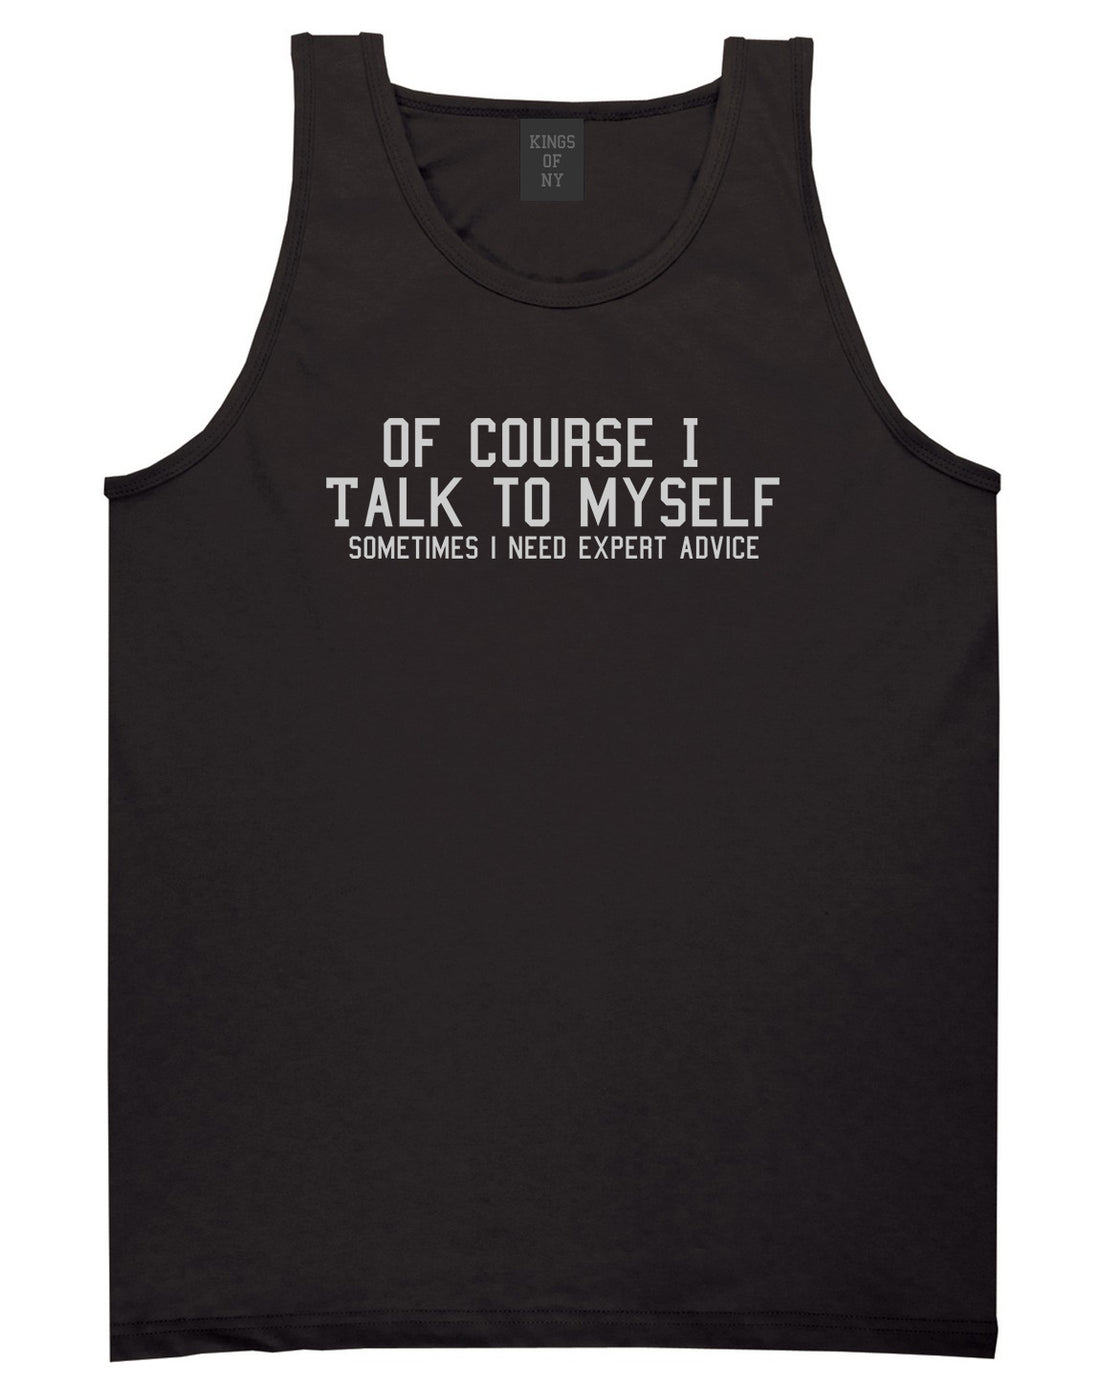 Of Course I Talk To Myself Funny Sarcasm Mens Tank Top T-Shirt Black